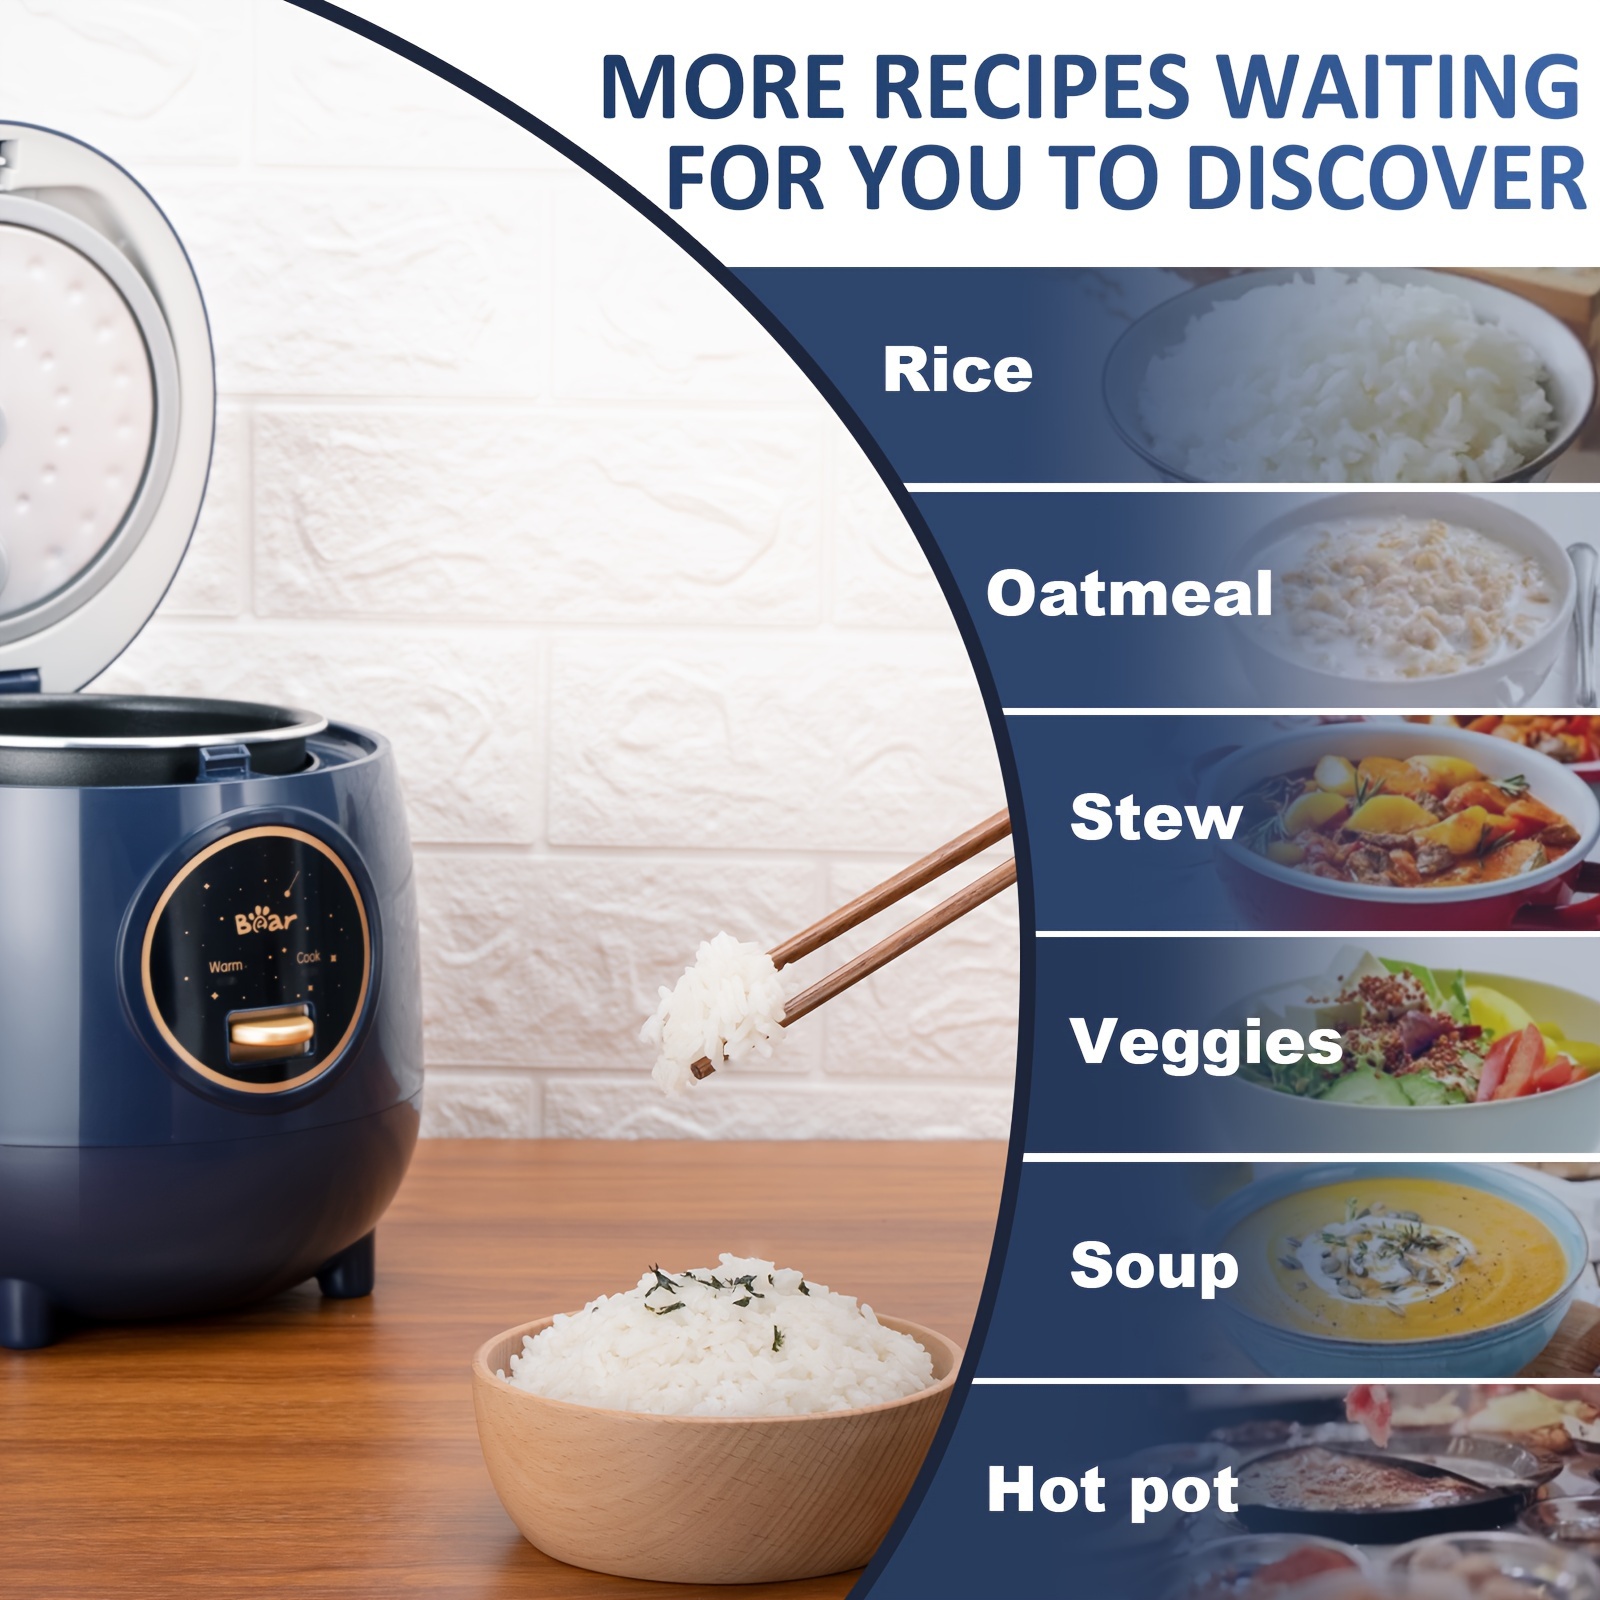 

Bear 2 Cups Mini Rice Cooker For White/brown Rice Oatmeal Soup, 1.2l Portable Non-stick Small Travel Rice Cooker, Bpa Free, 1 Button To Cook And Keep Warm Function (navy Blue)